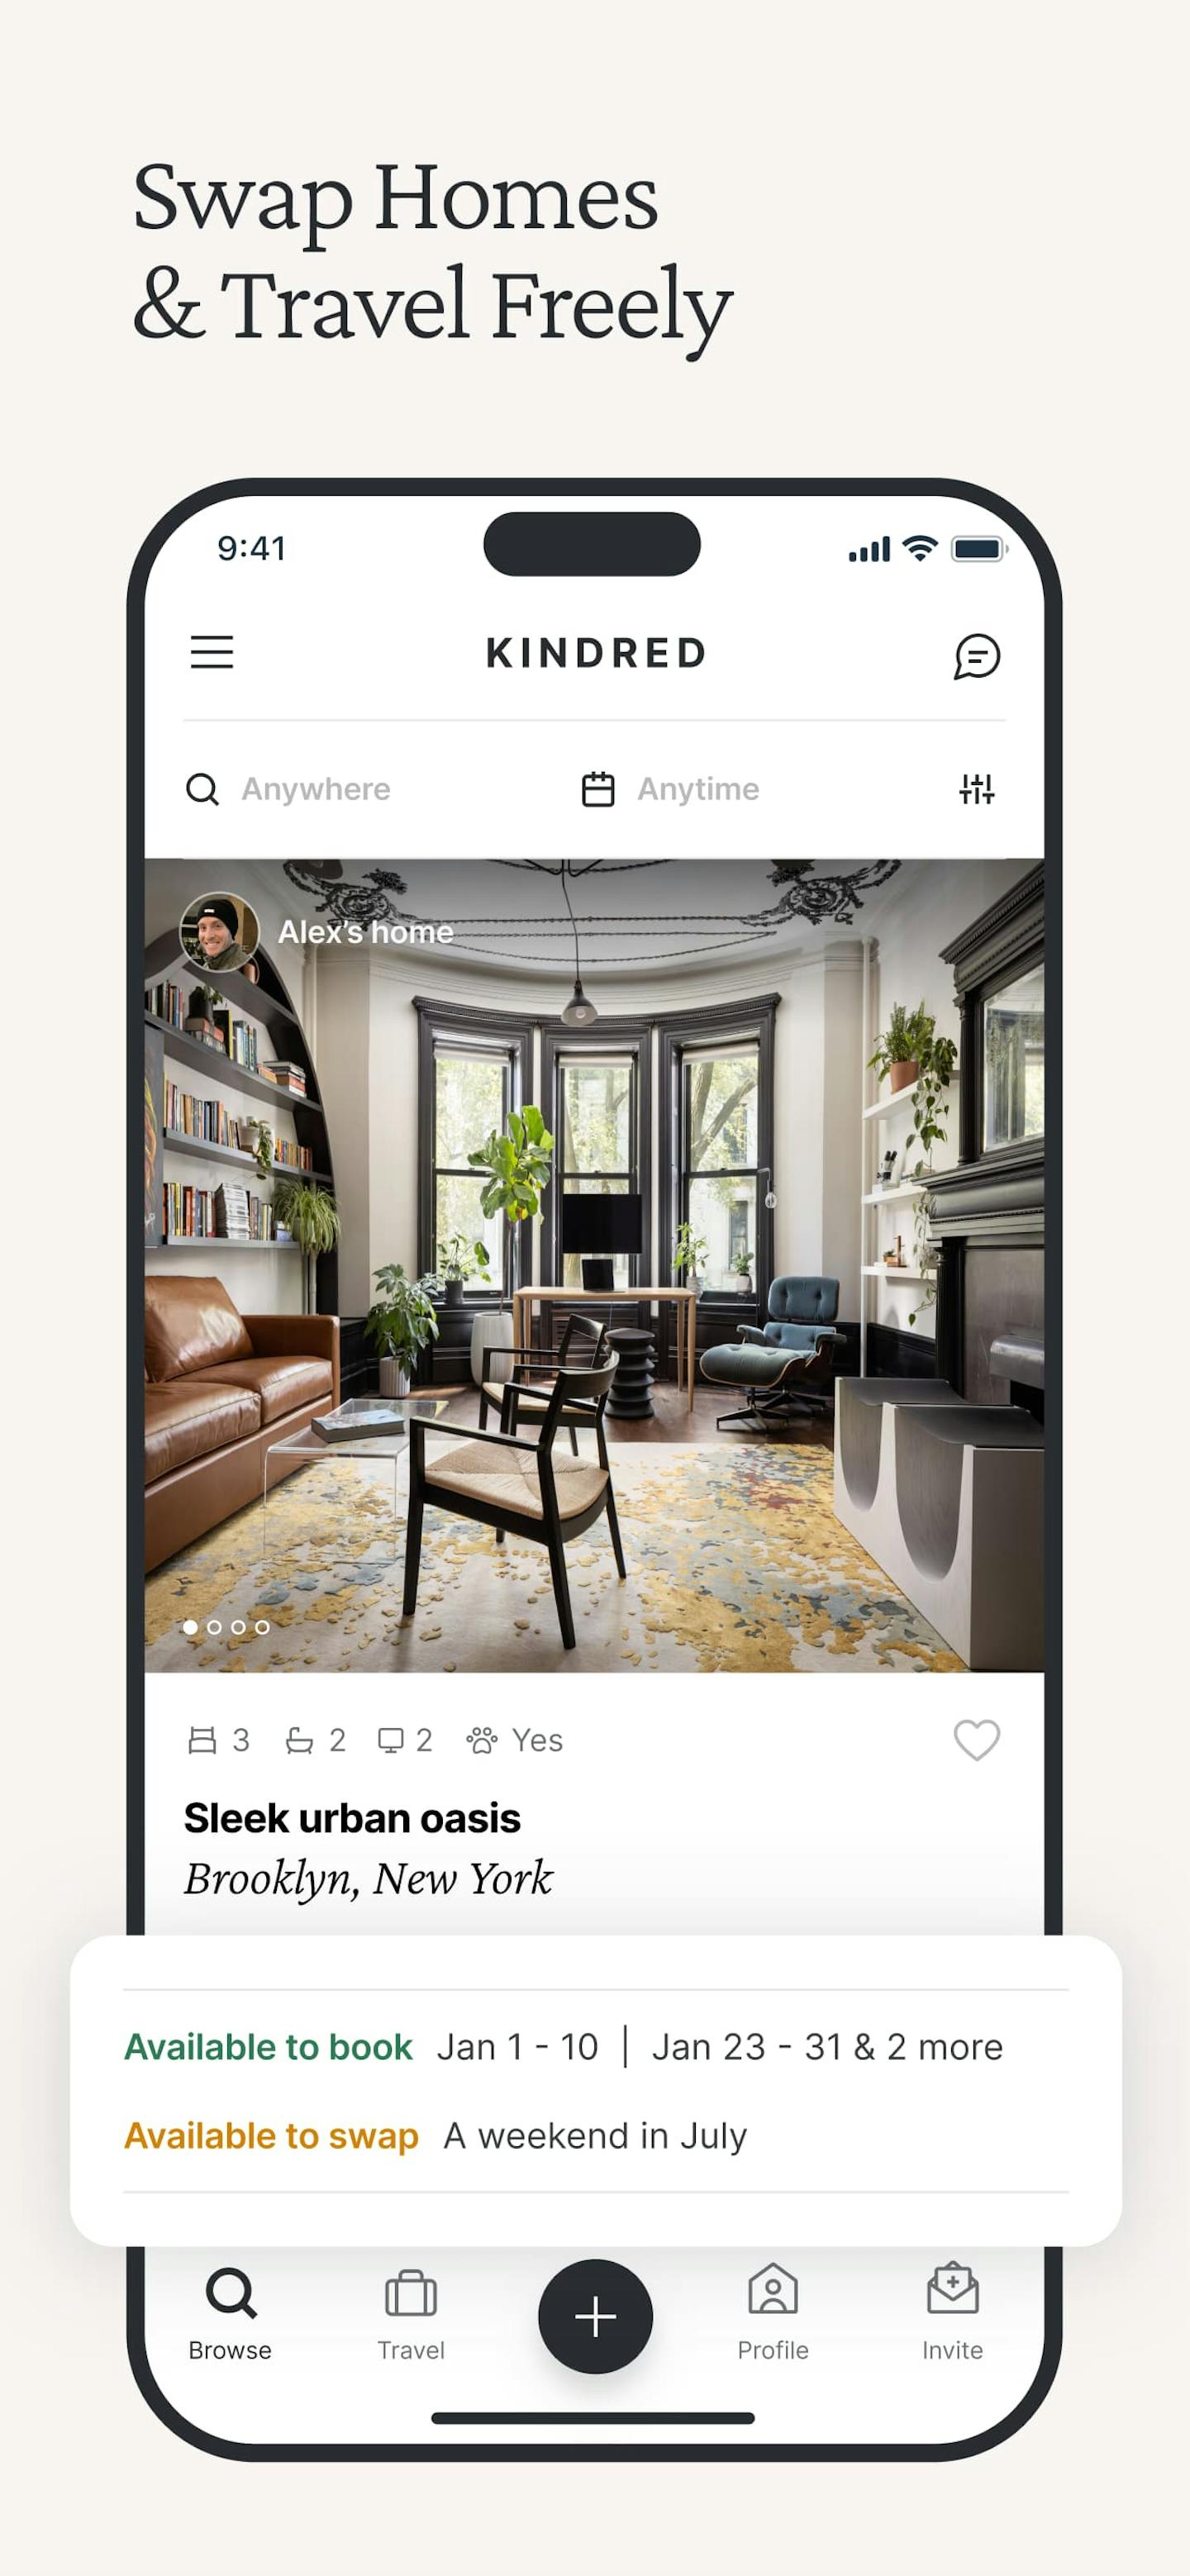 Swap homes and travel freely with Kindred - Find and book a stylish home in desired locations with ease using custom filters for any destination and date.